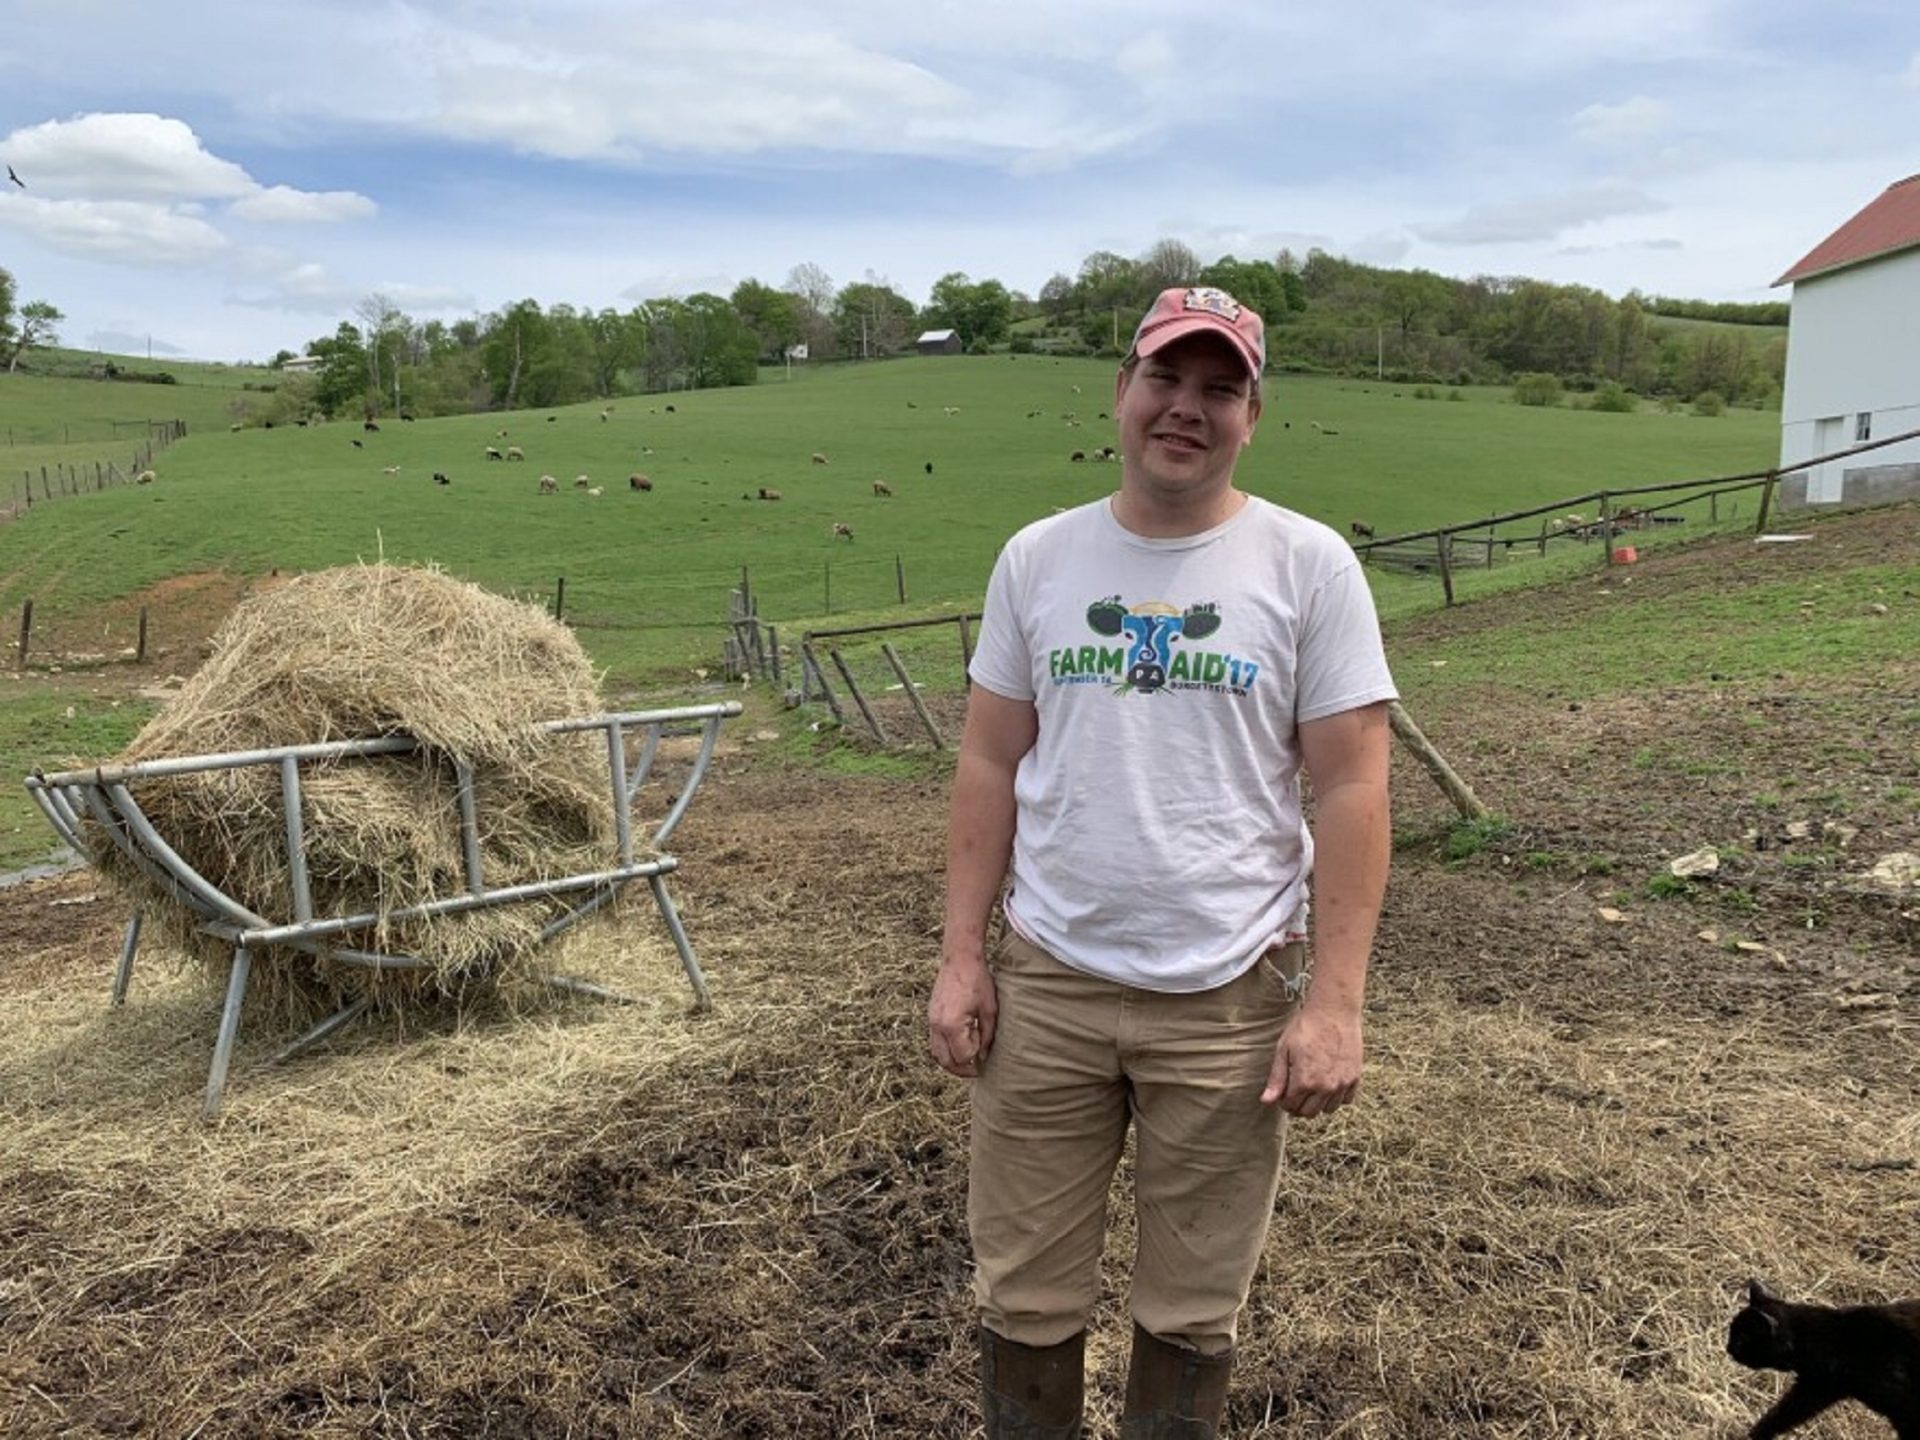 Drew Manko inherited the Ross Farm in Eighty Four, Pa. He raises rare breeds of livestock and sells the meat to restaurants and retailers in southwestern Pennsylvania and Wheeling, W.Va.